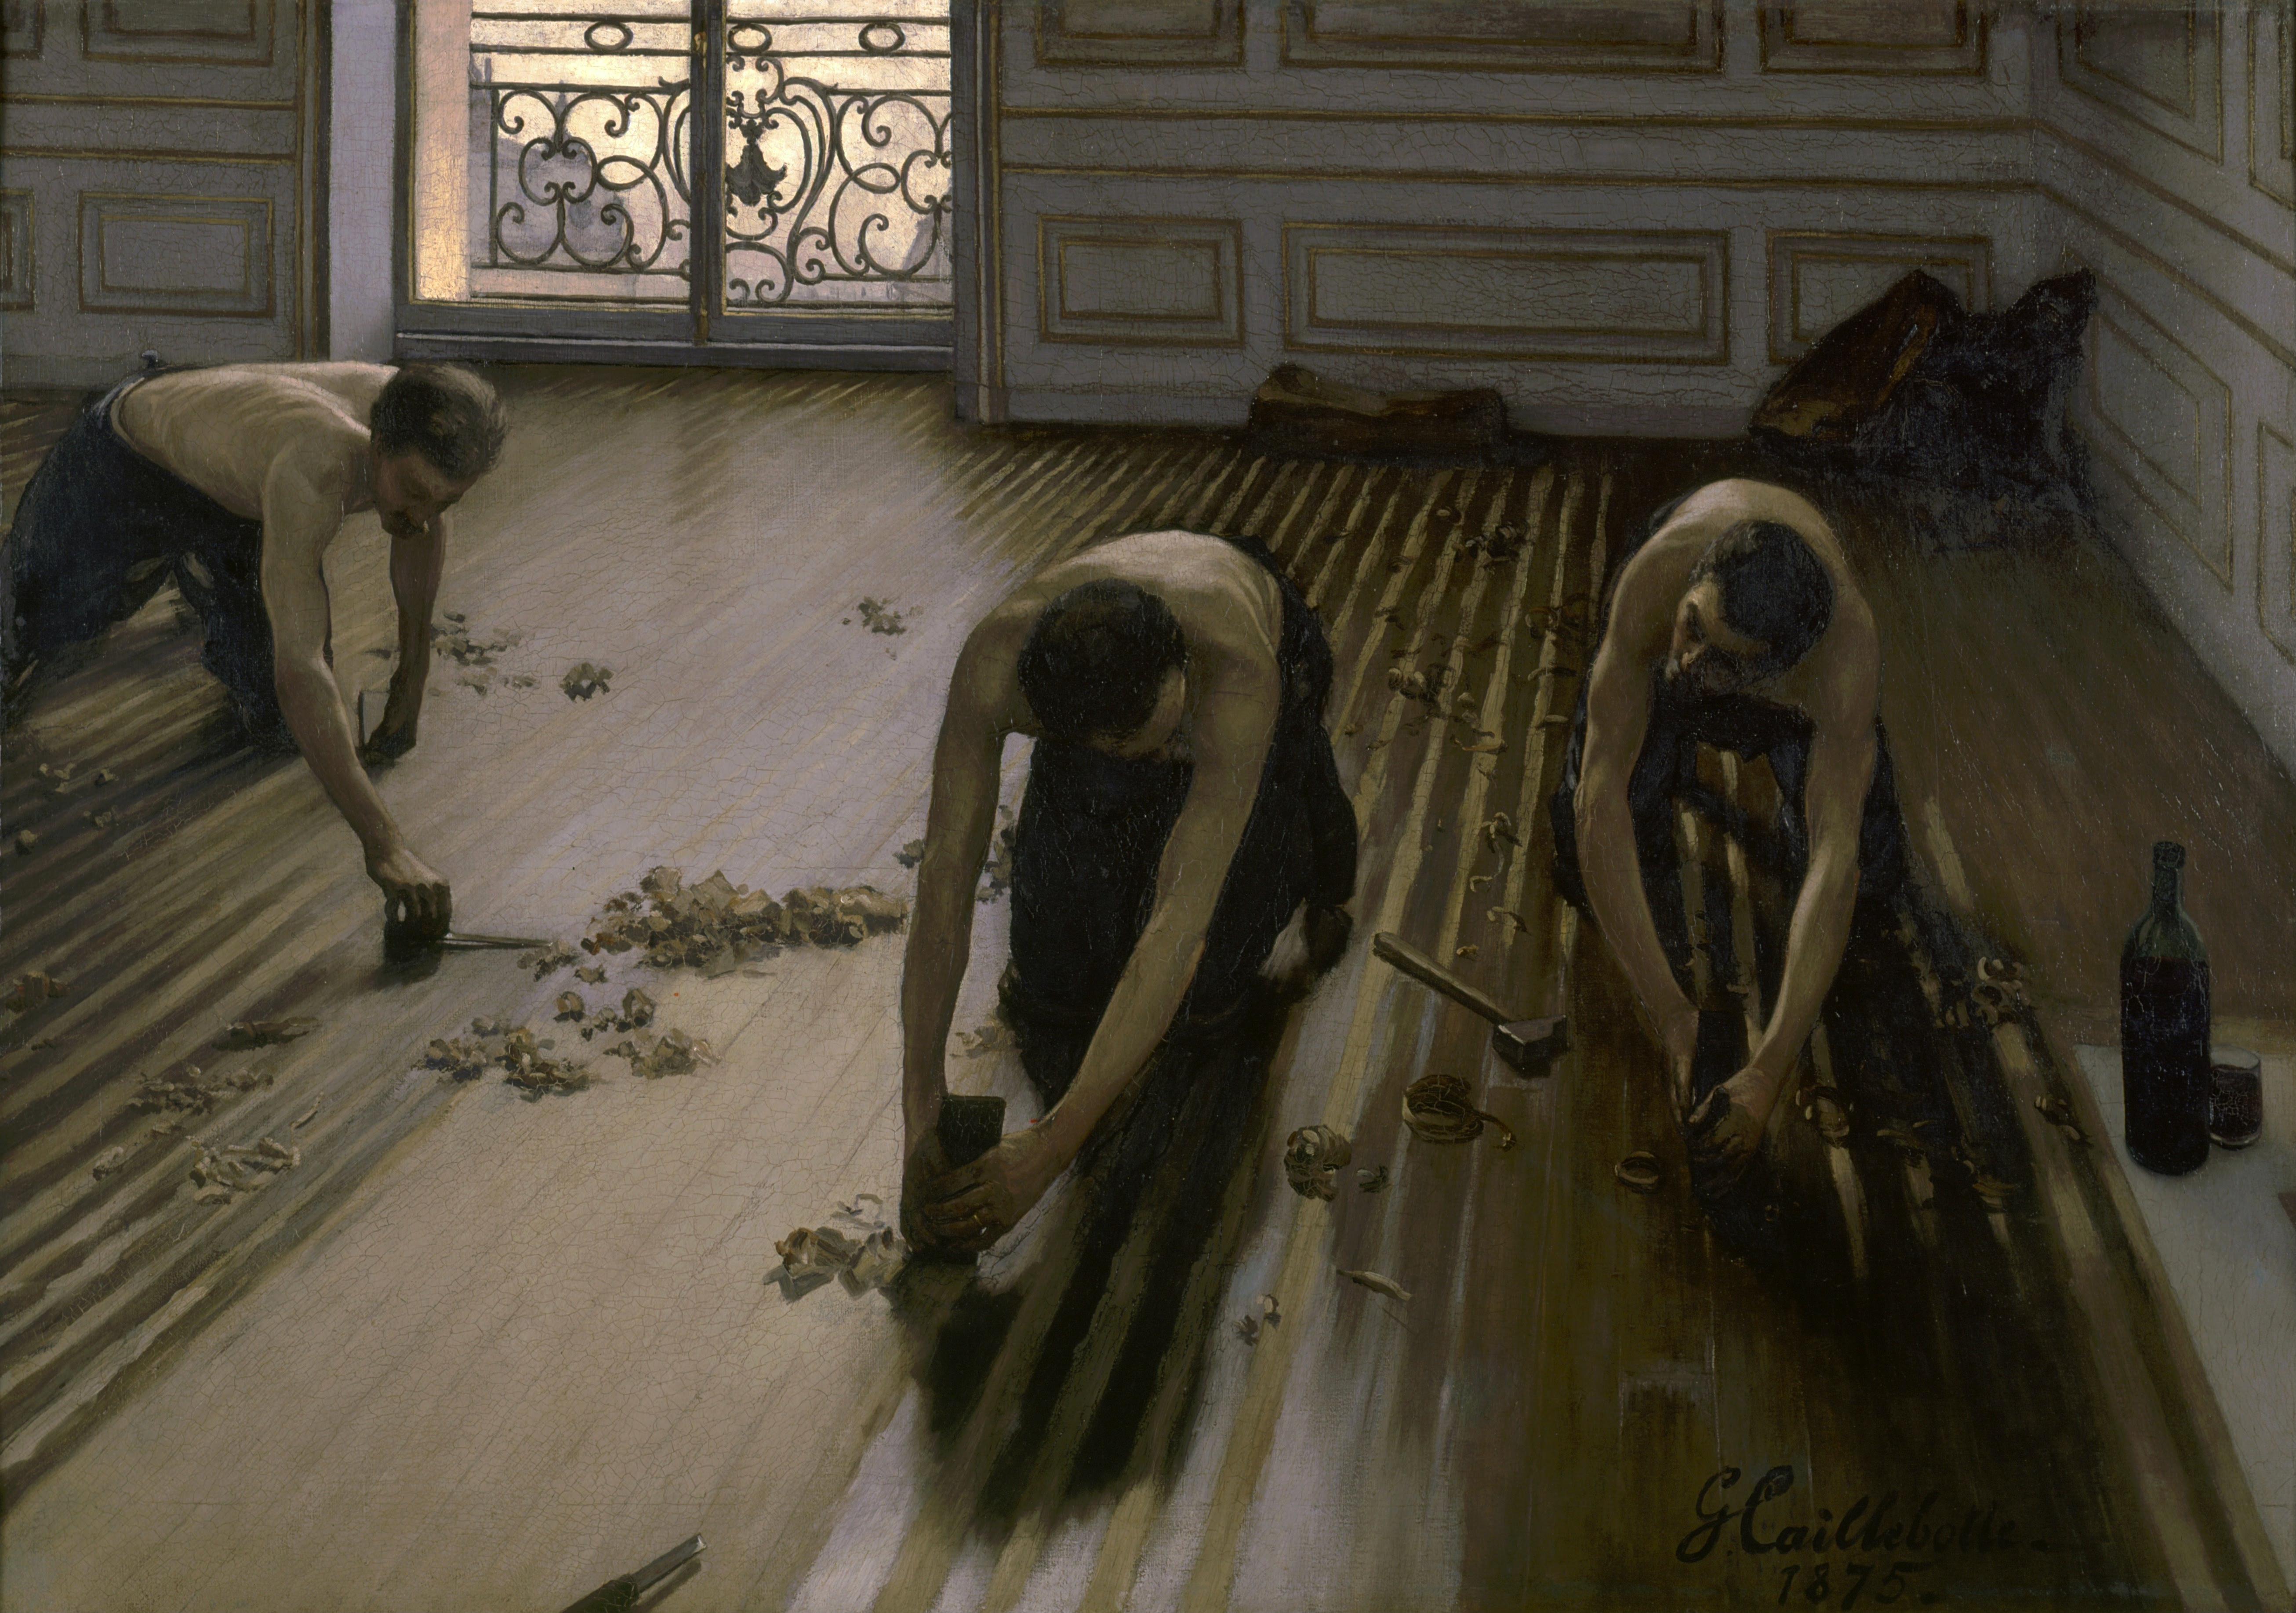 The Floor Scrapers by Gustave Caillebotte - 1875 - 102 x 146.5 cm Musée d'Orsay